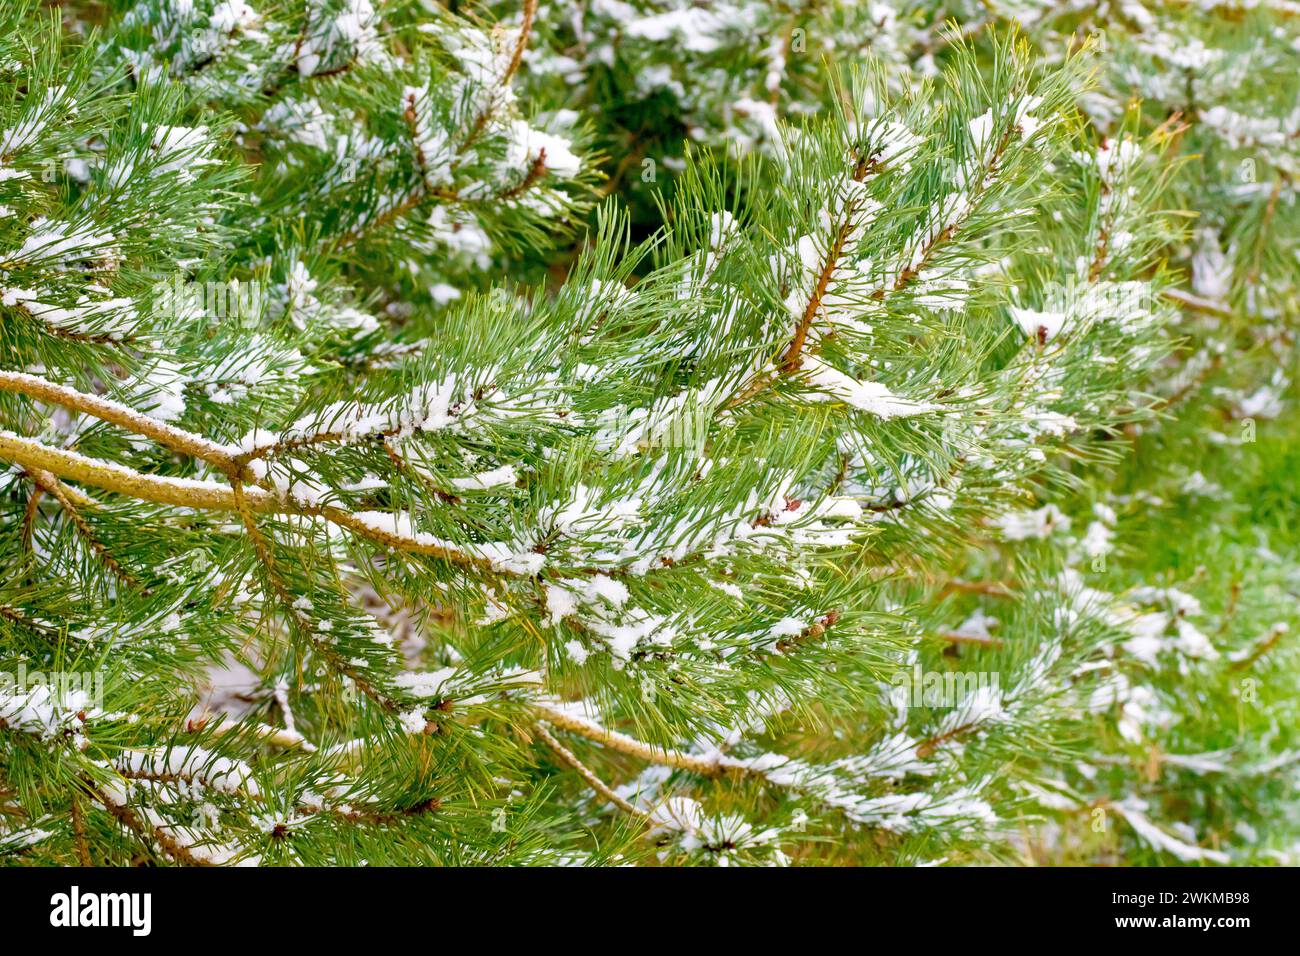 Scot's Pine (pinus sylvestris), close up showing branches of the tree with the green needles or foliage covered in snow. Stock Photo